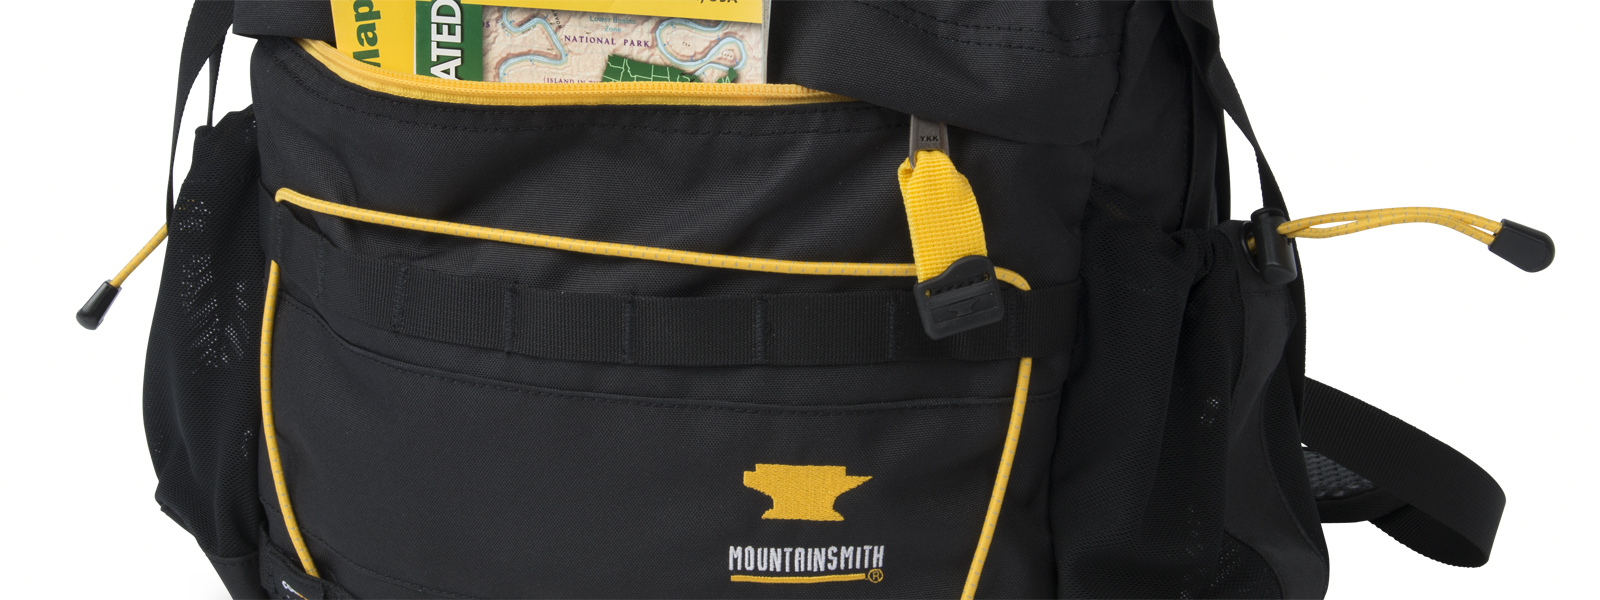 CORDURA® Brand Gears Up With Mountainsmith